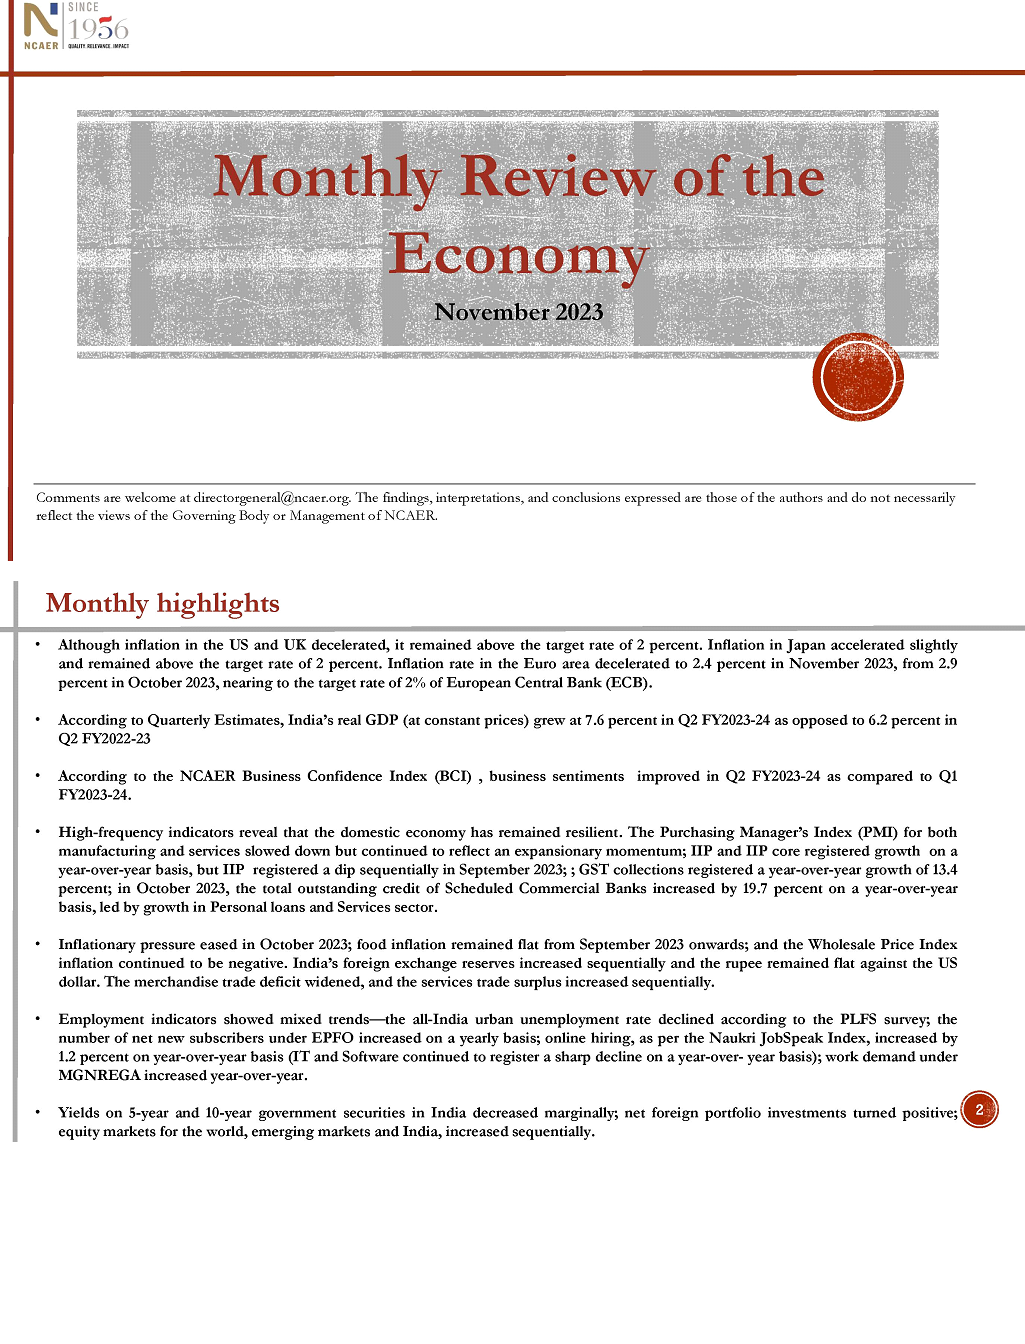 Monthly Review of the Economy – November 2023